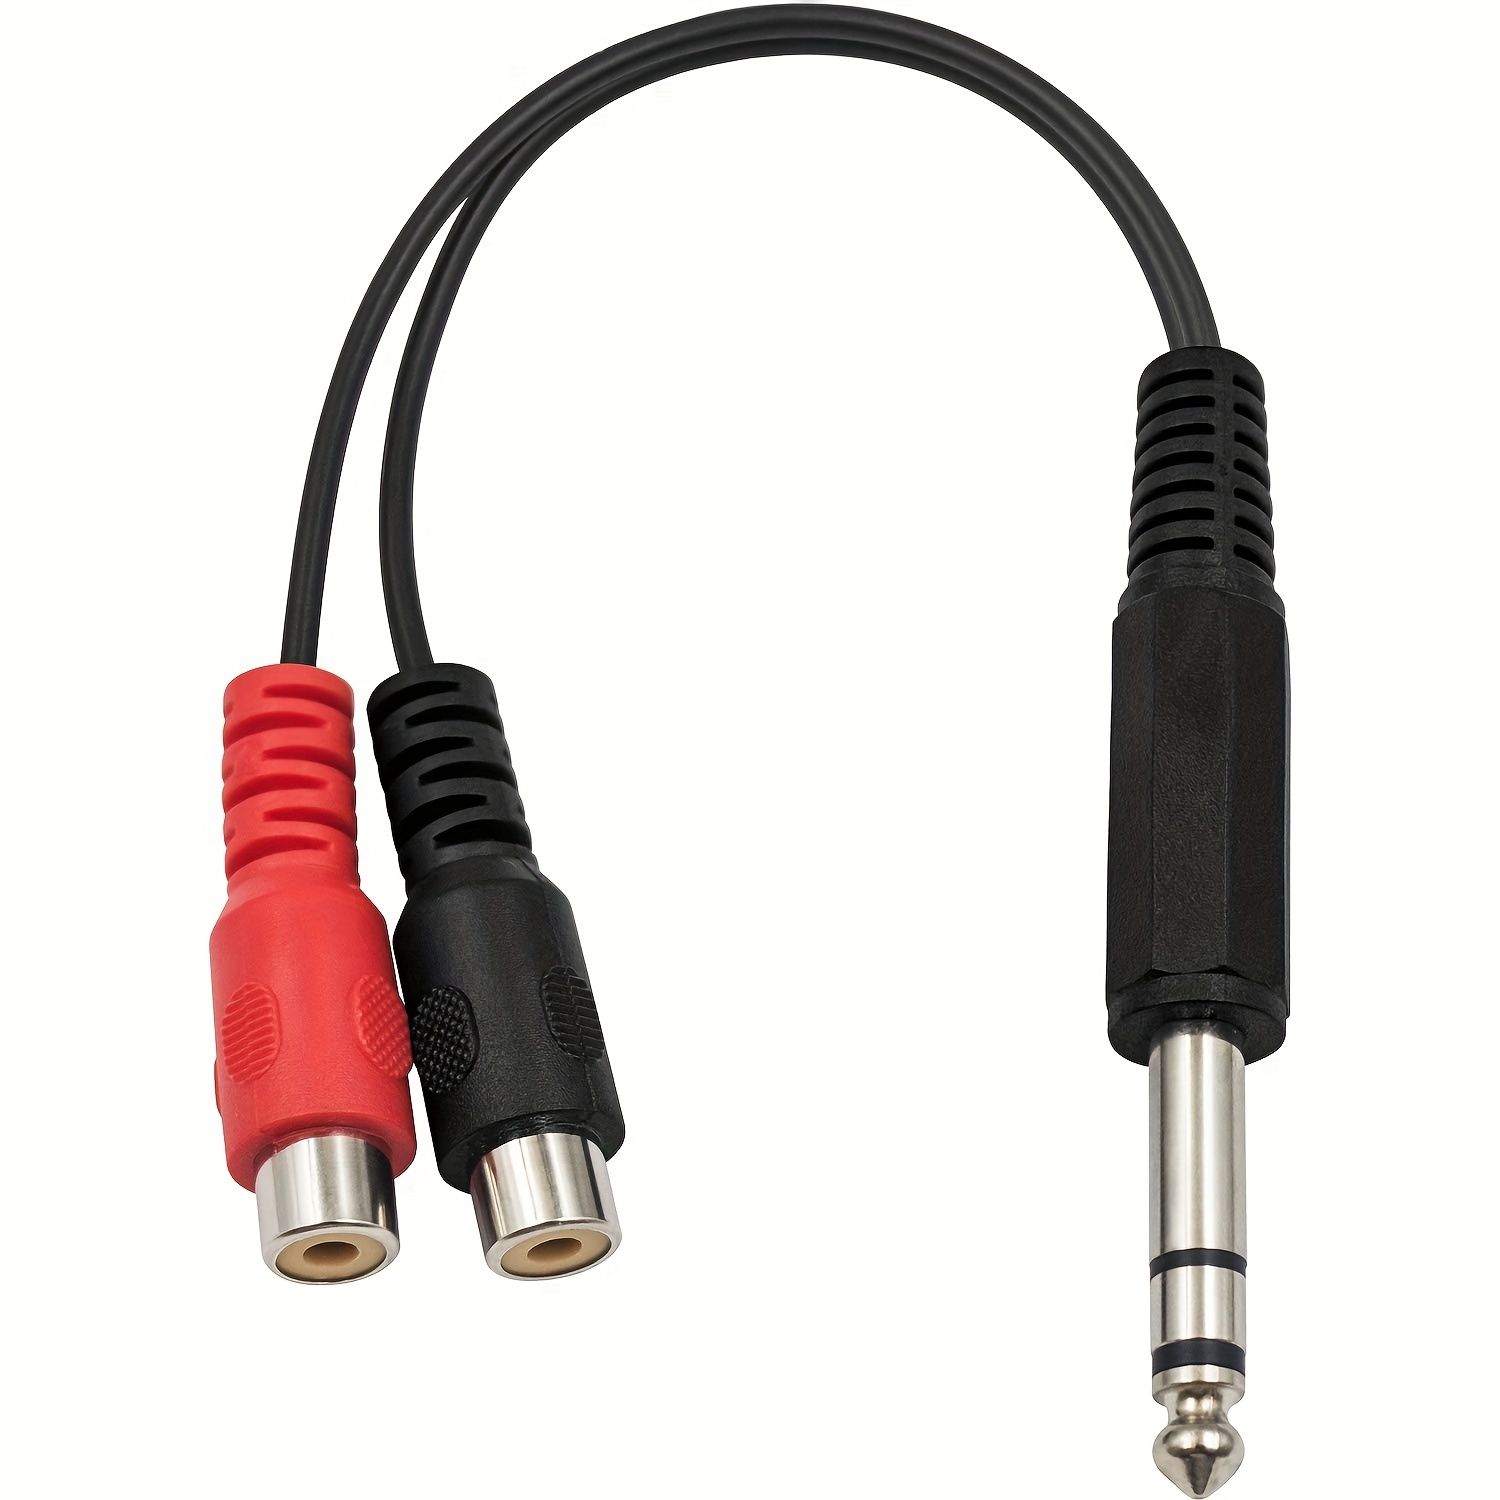 Female 1/8 3.5mm Stereo Jack to Twin/2x Male RCA Adapter Connector Cable